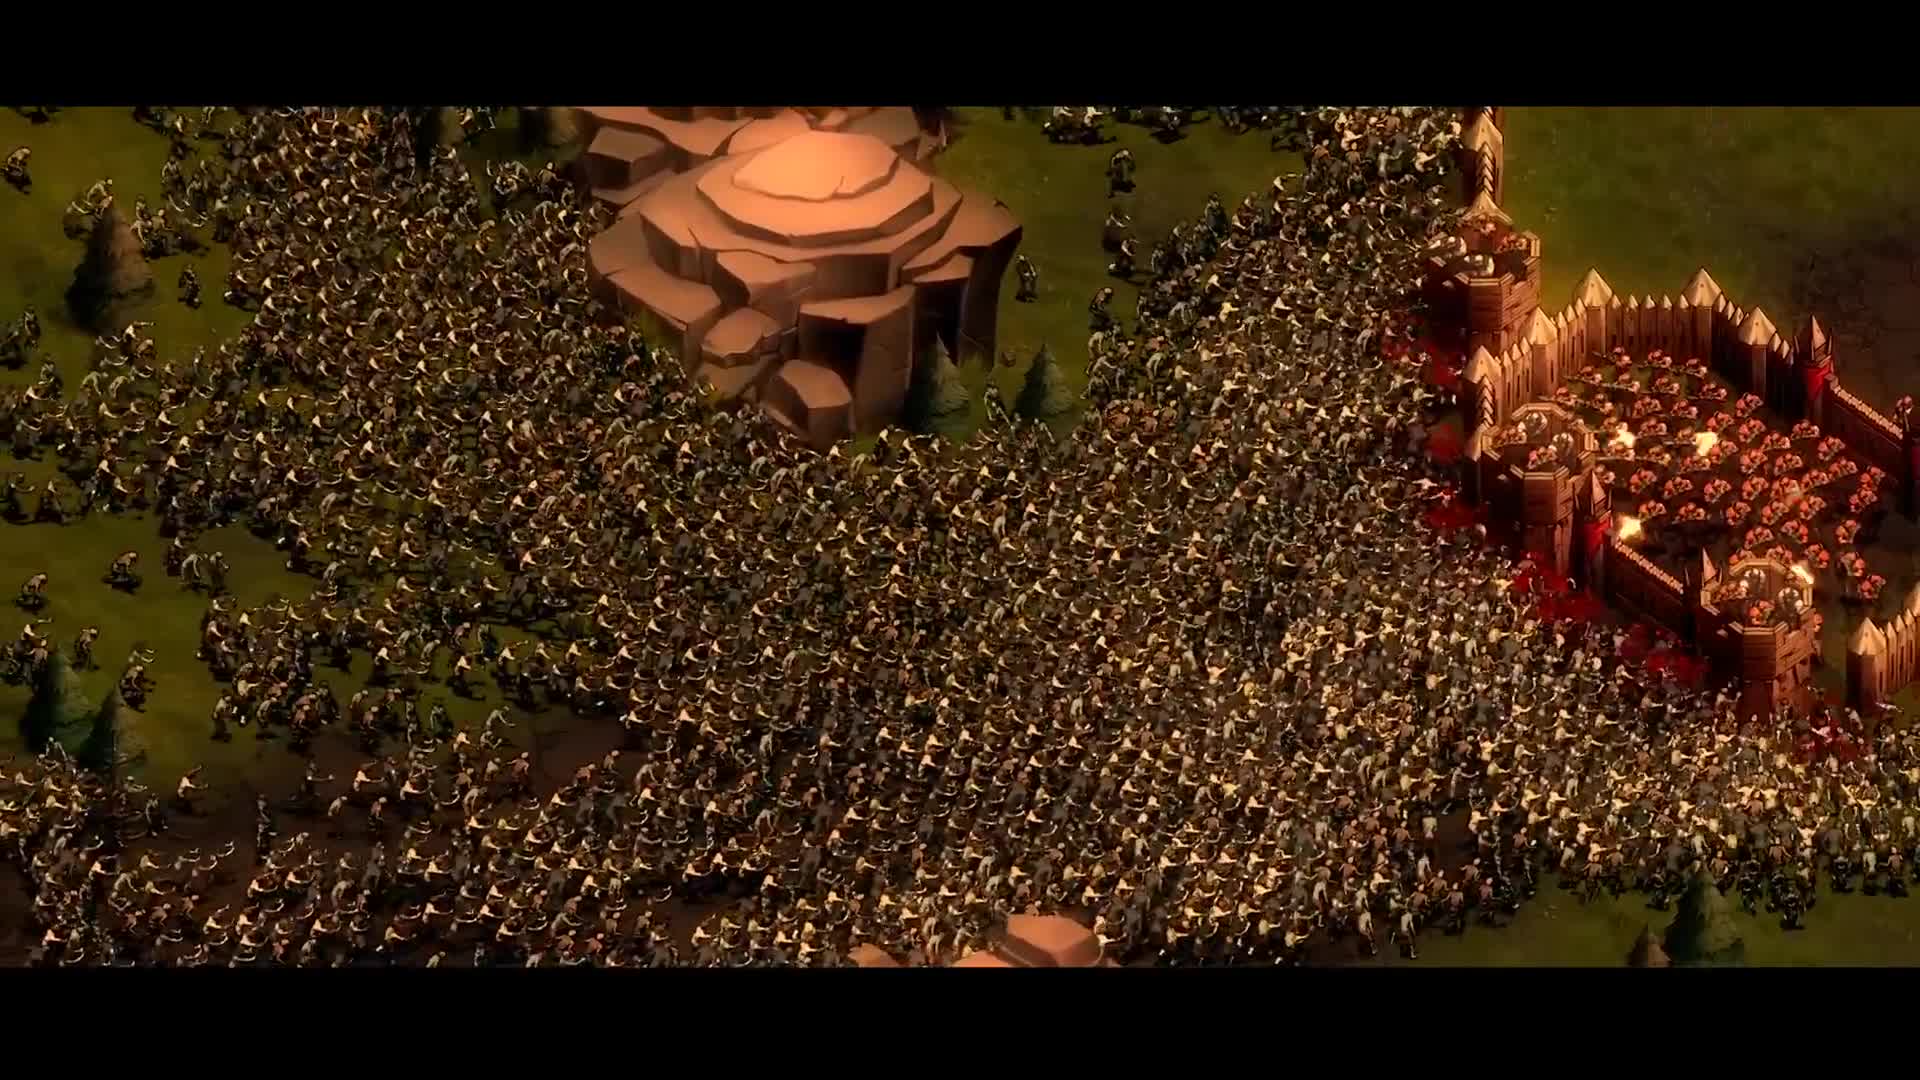 They Are Billions - Trailer